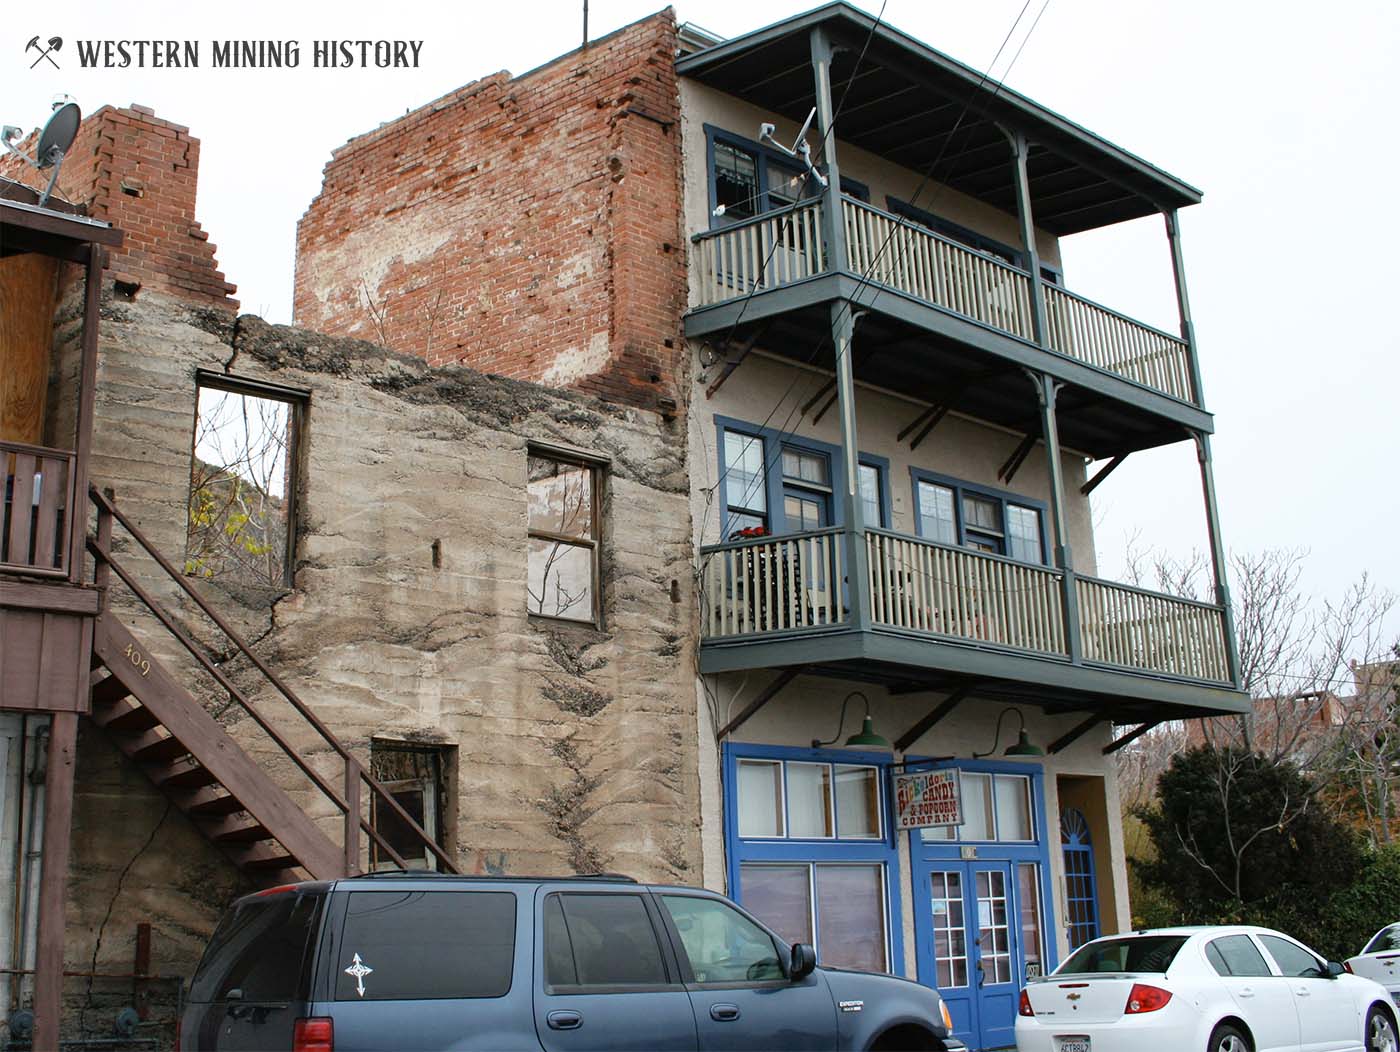 Typical state of buildings in Jerome today